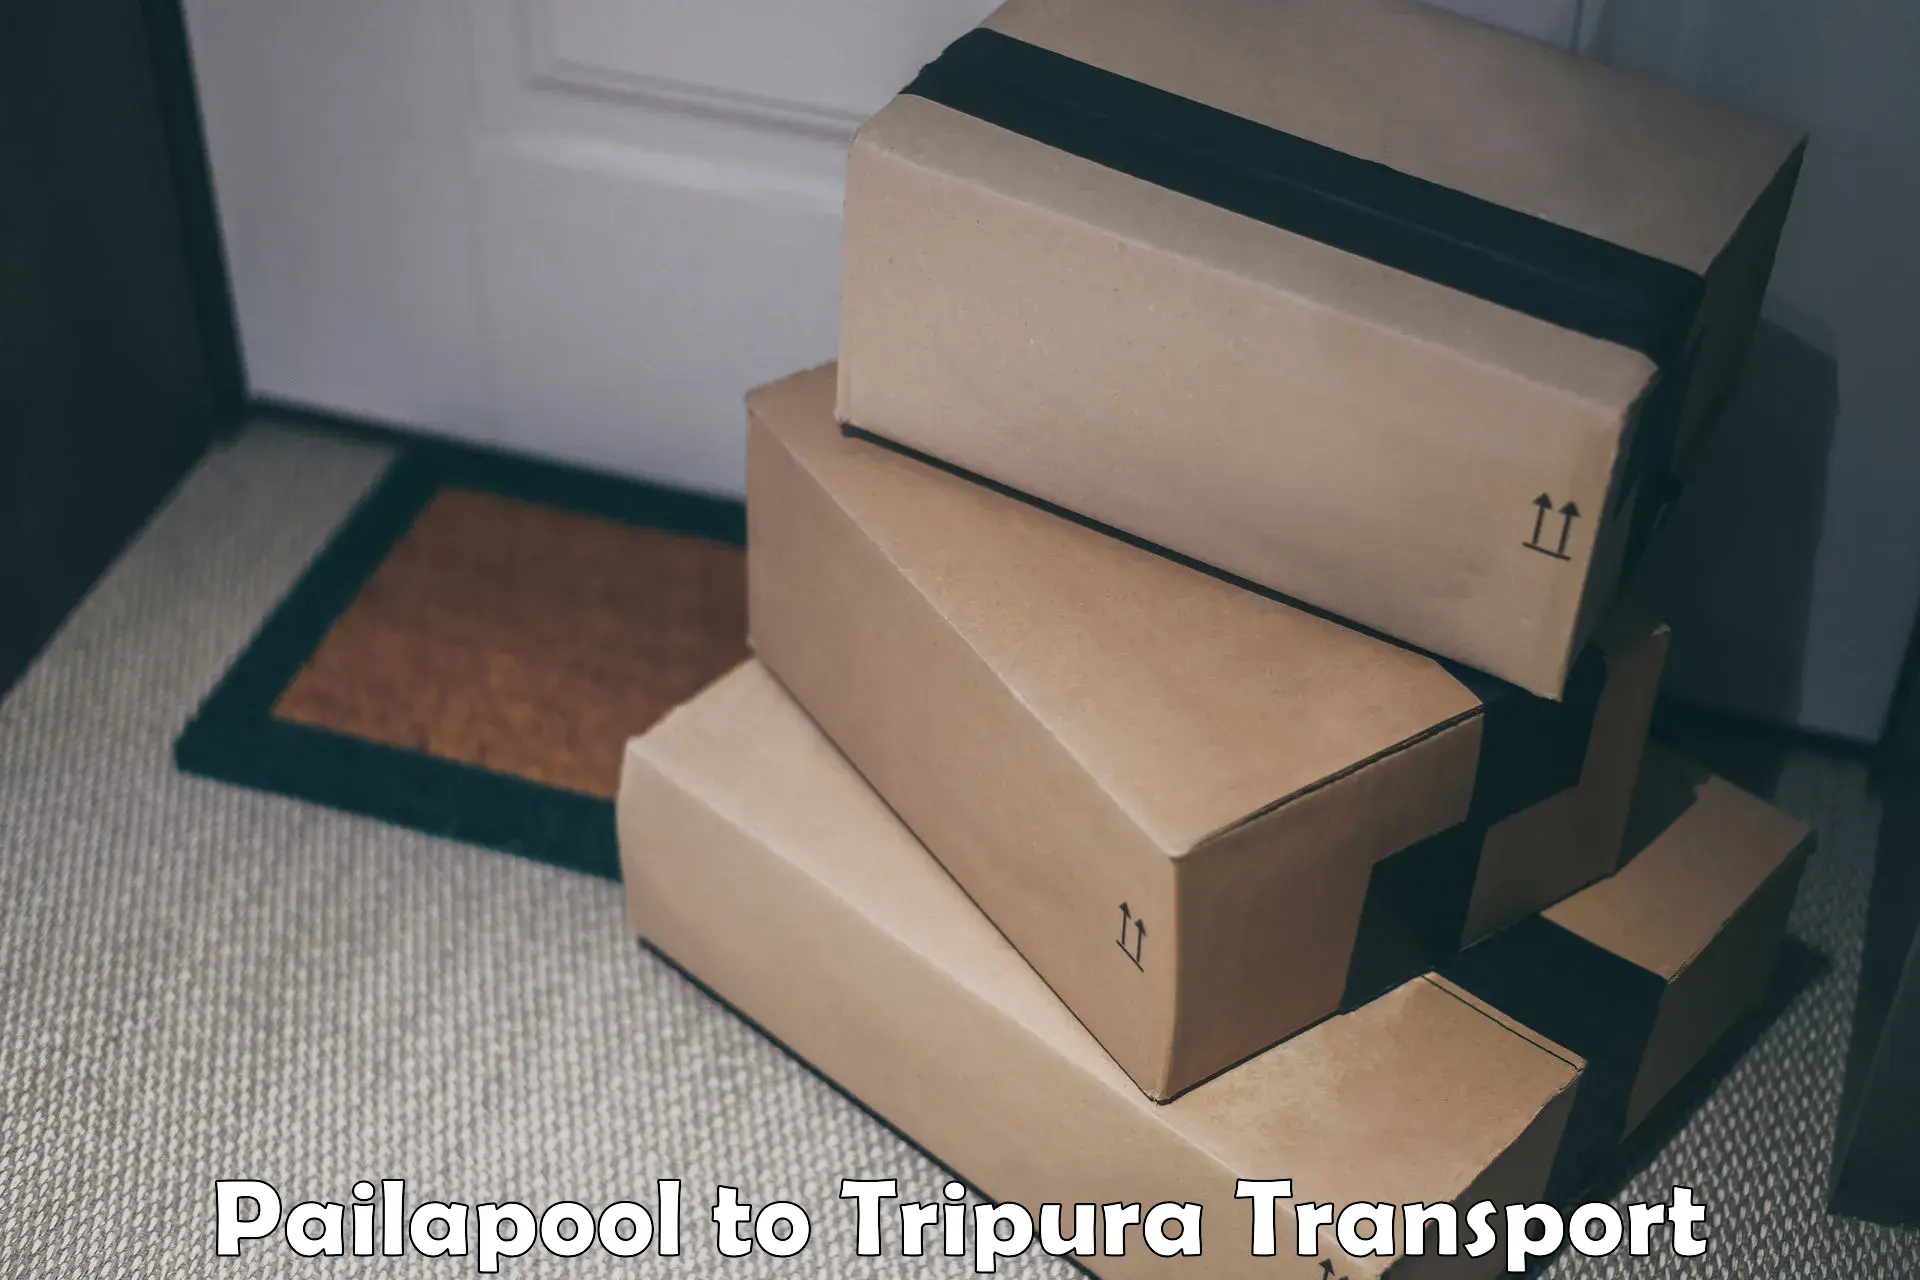 Vehicle transport services in Pailapool to Tripura